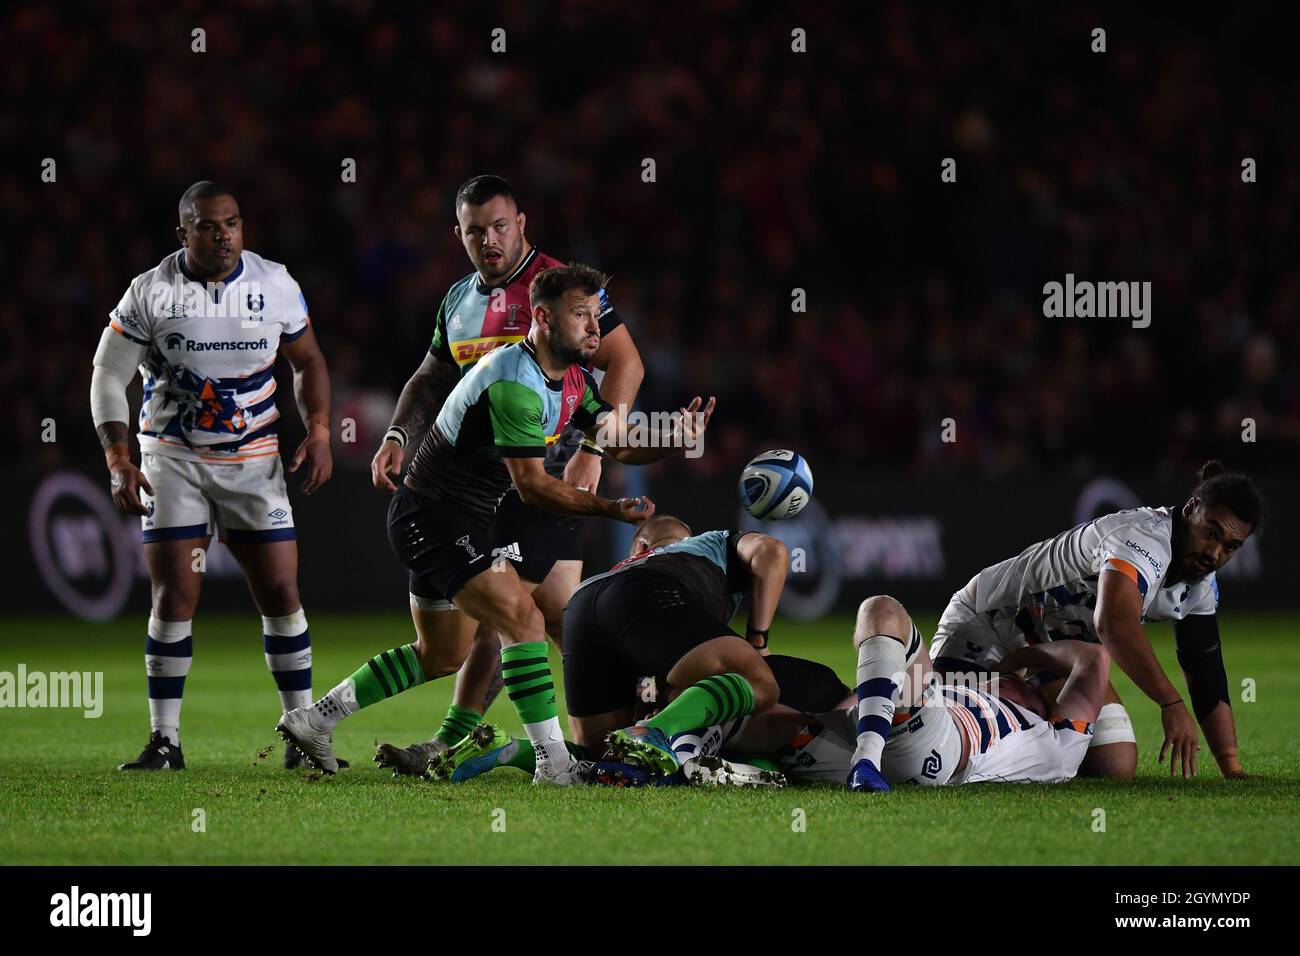 Twickenham Stoop Stadium, UK, UK. 8th October, 2021. Harlequins' Danny Care passes during the Gallagher English Premiership game between Harlequins and Bristol Bears: Credit: Ashley Western/Alamy Live News Stock Photo